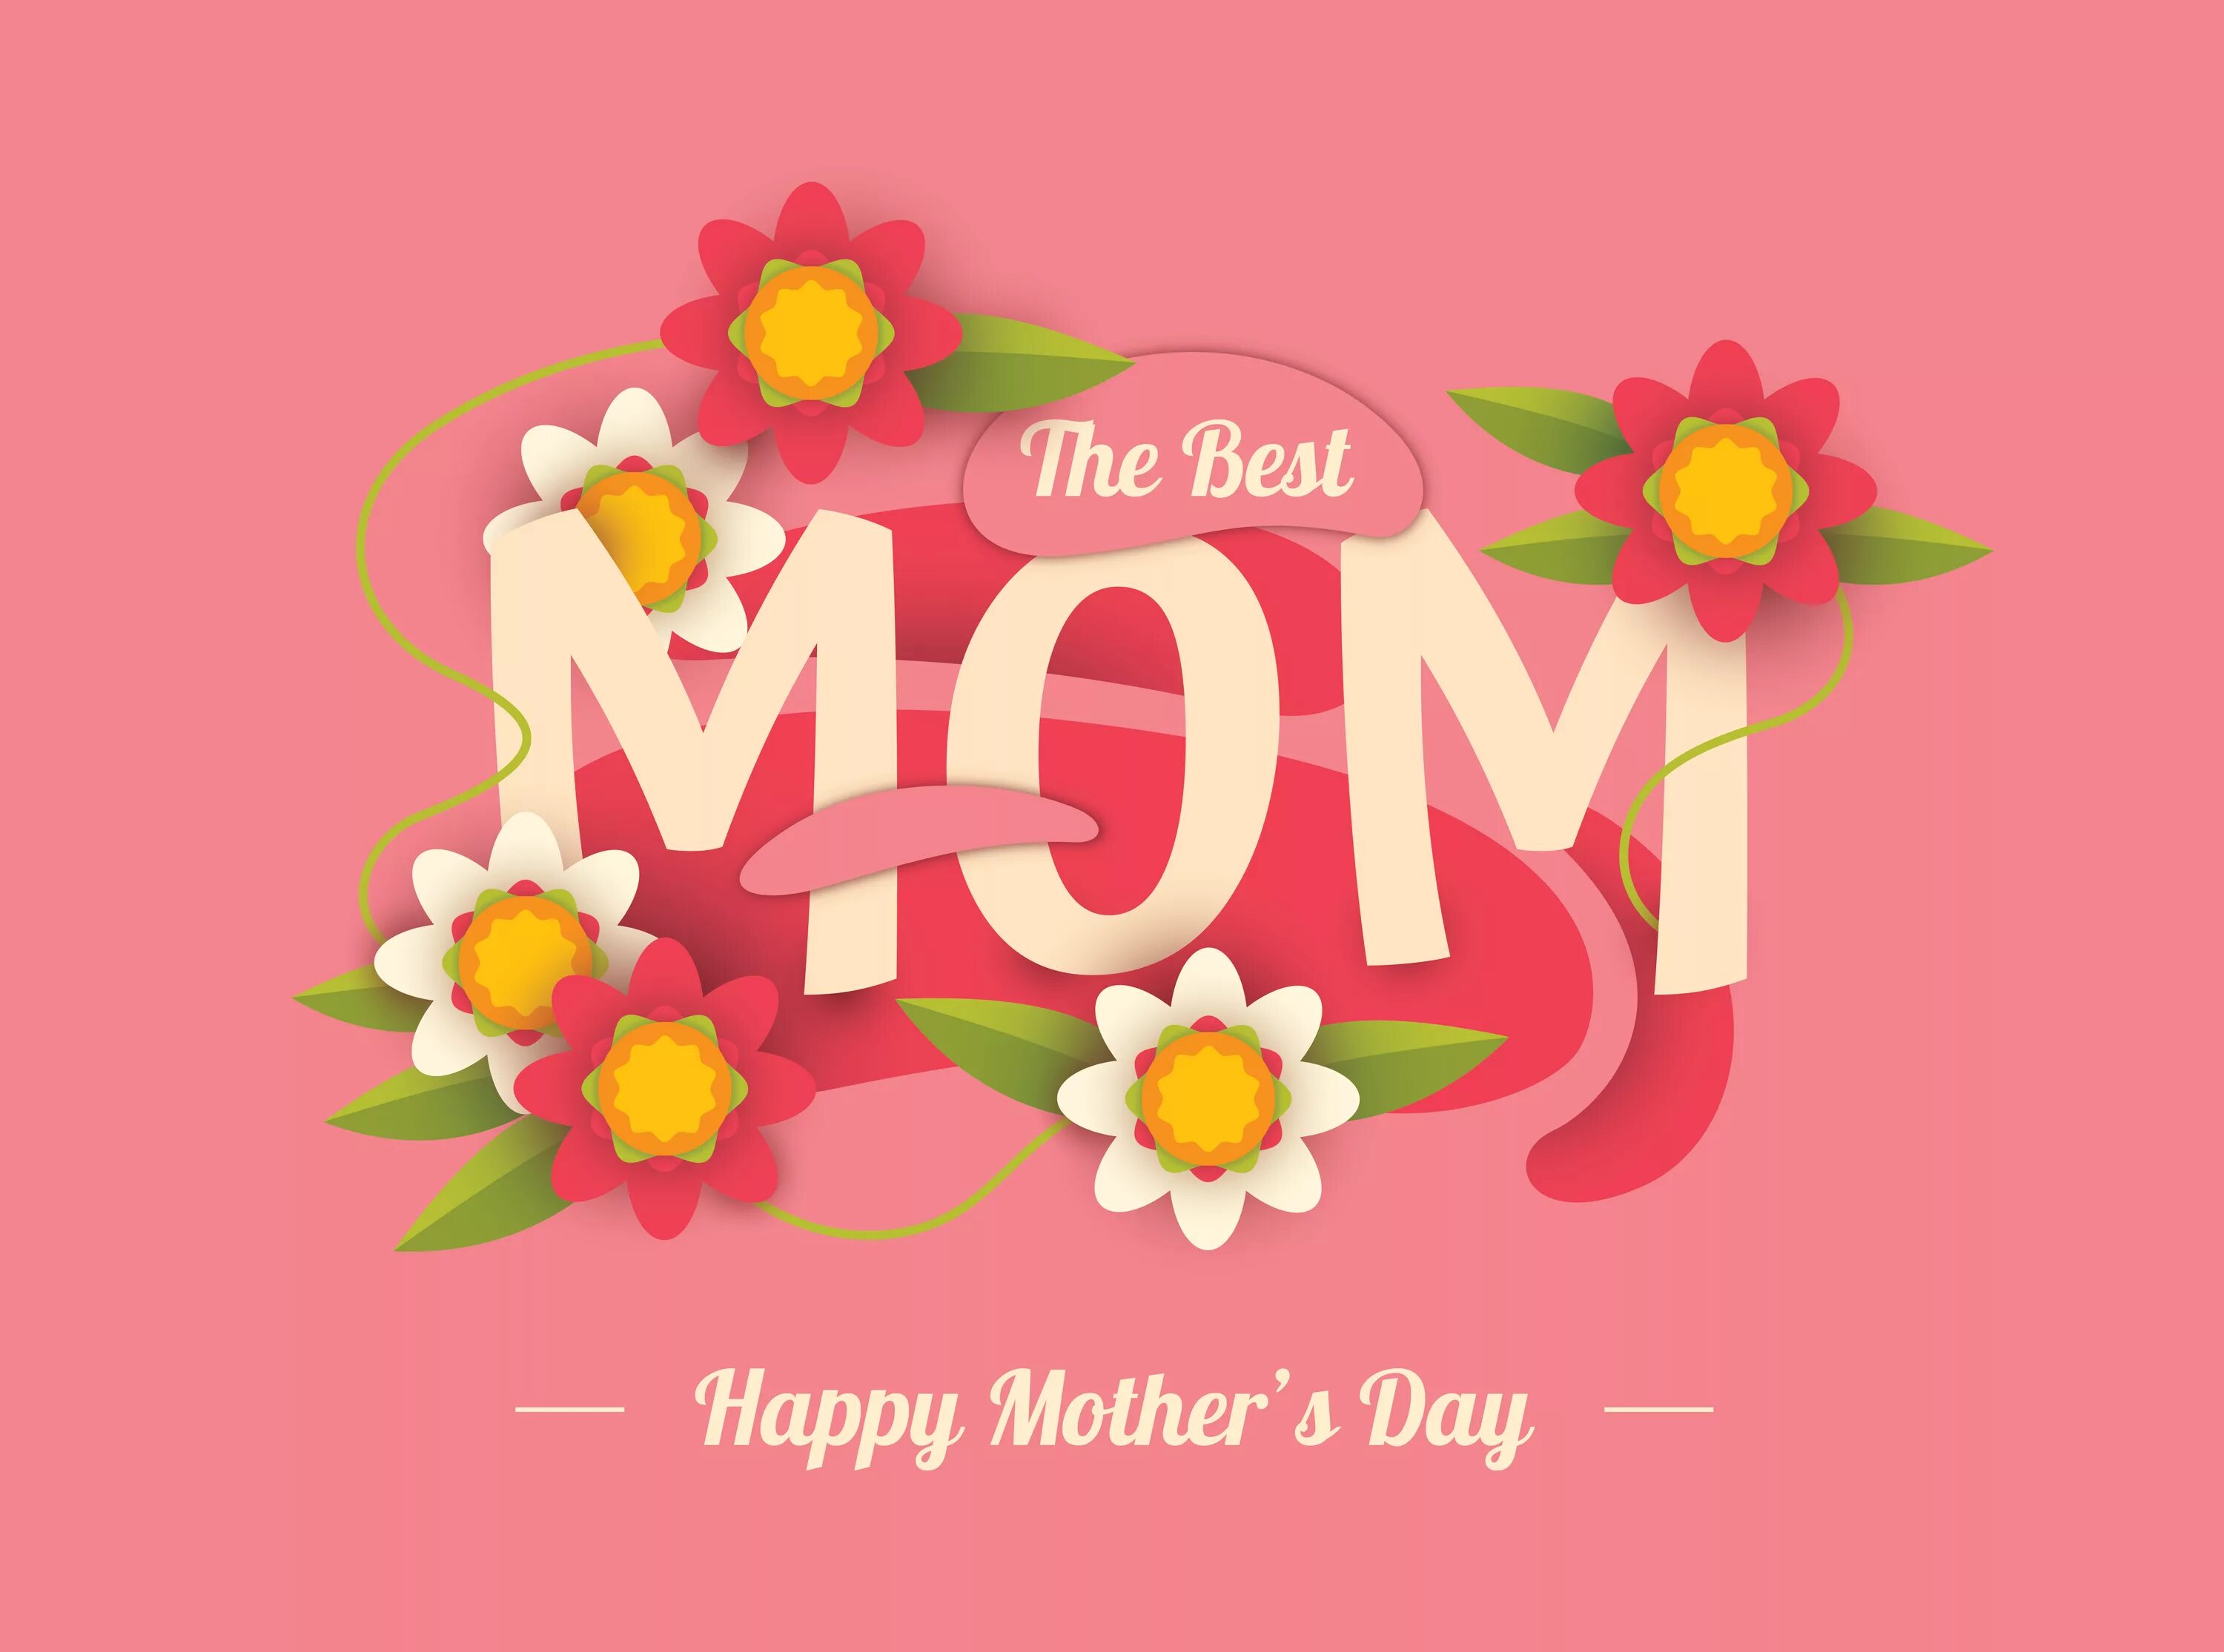 Happy mother's Day. Happy mother's Day картинки. Congratulations for mothers Day. Фоновые картинки к mothers Day.